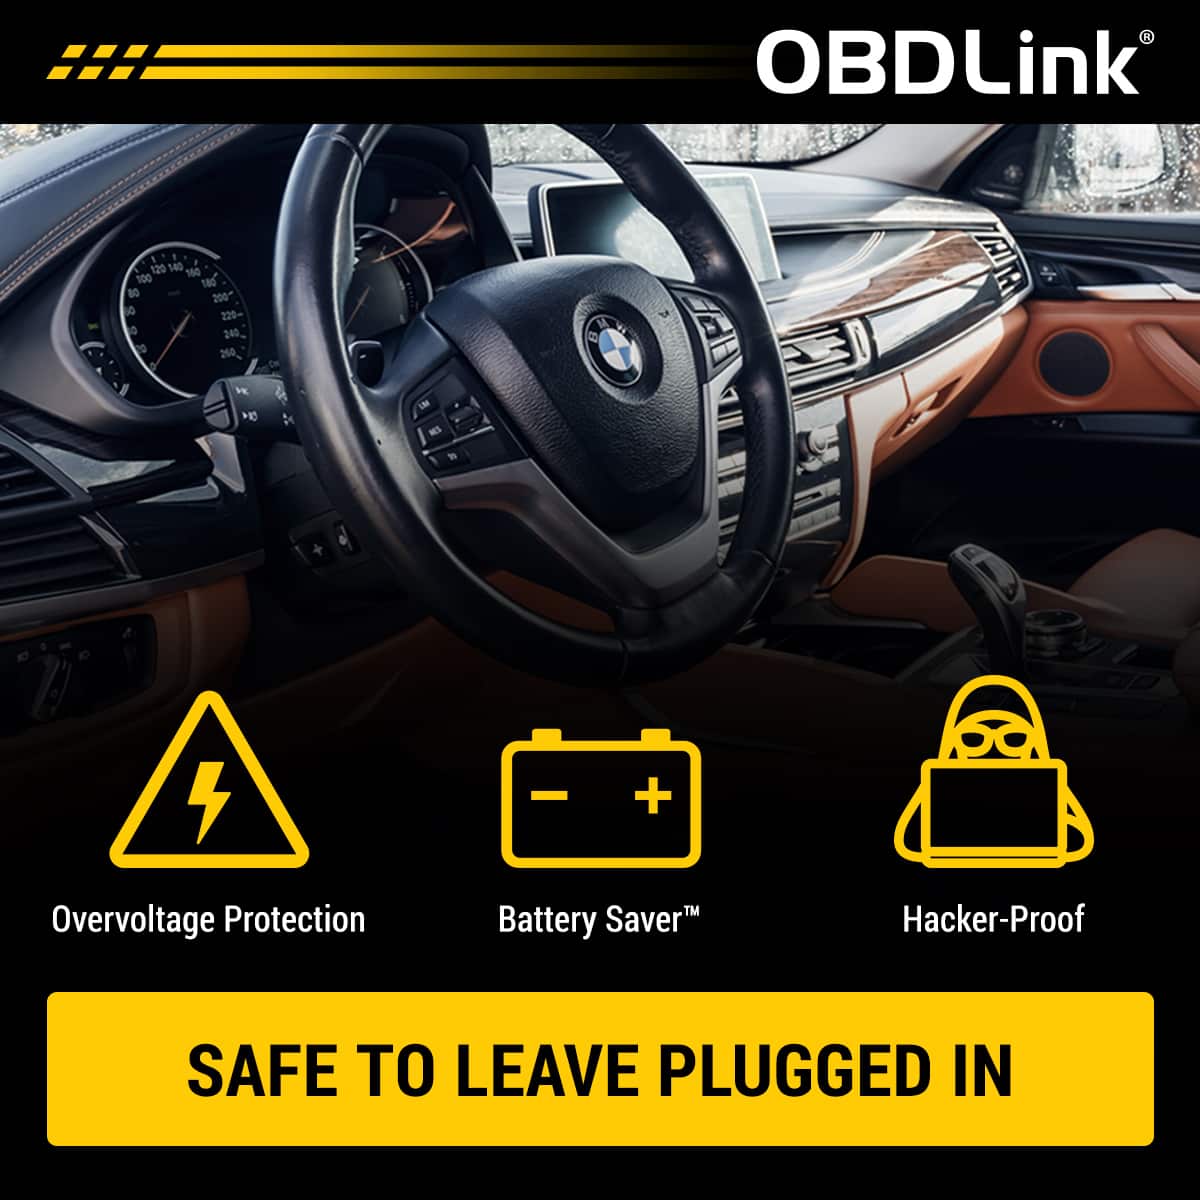 The OBDLink can be left plugged it without any hassles